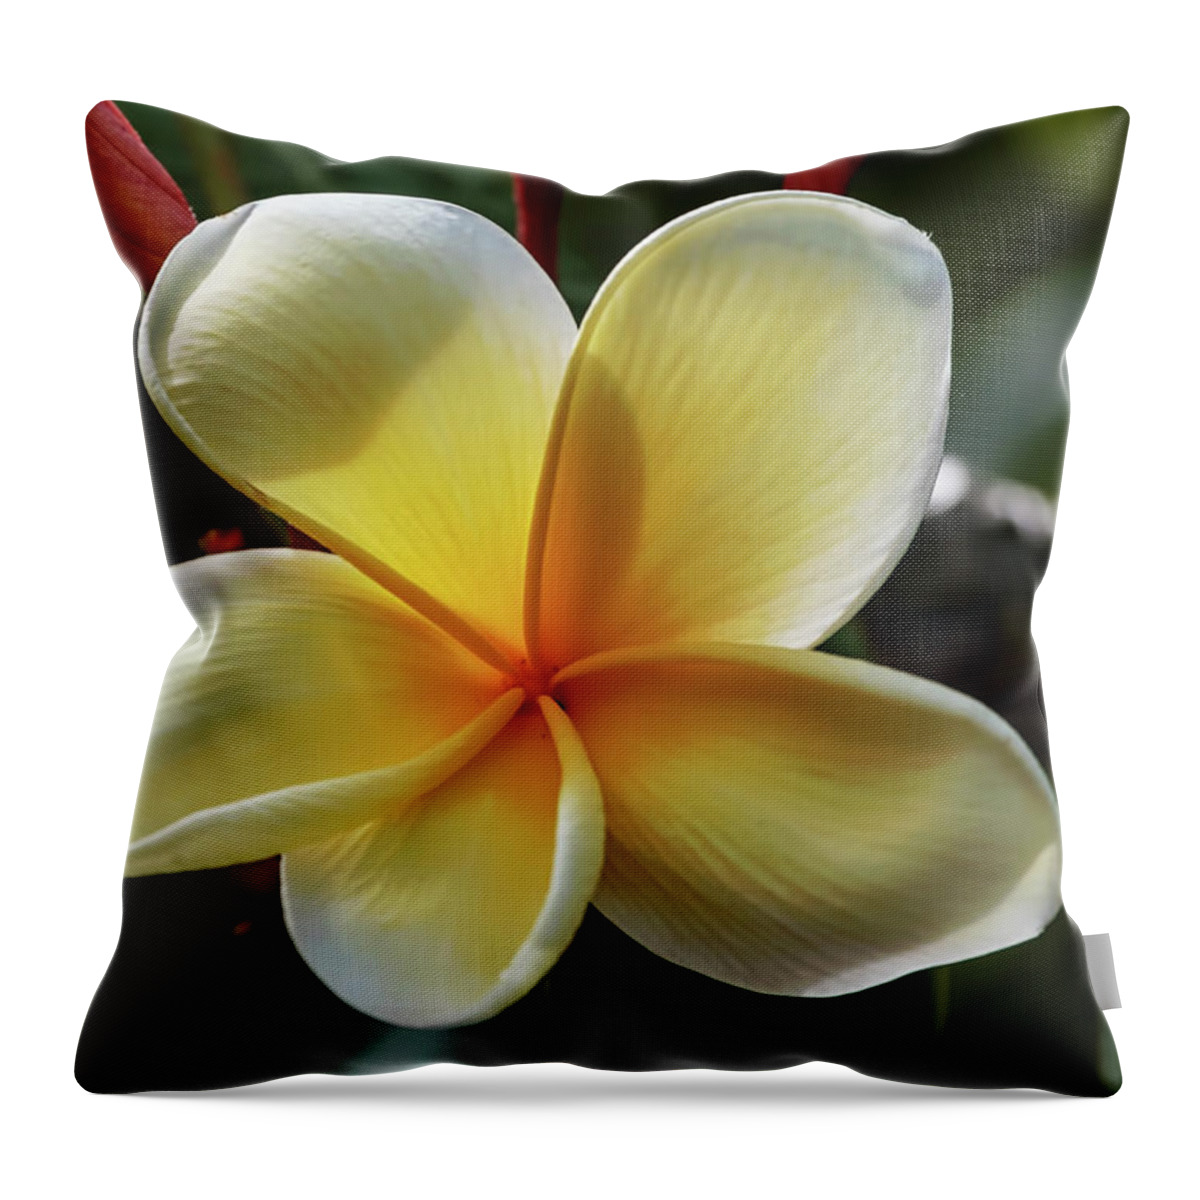 Florida Throw Pillow featuring the photograph Florida Flowers - Edison and Ford Gardens - Frangipani Plumeria Up Close by Ronald Reid